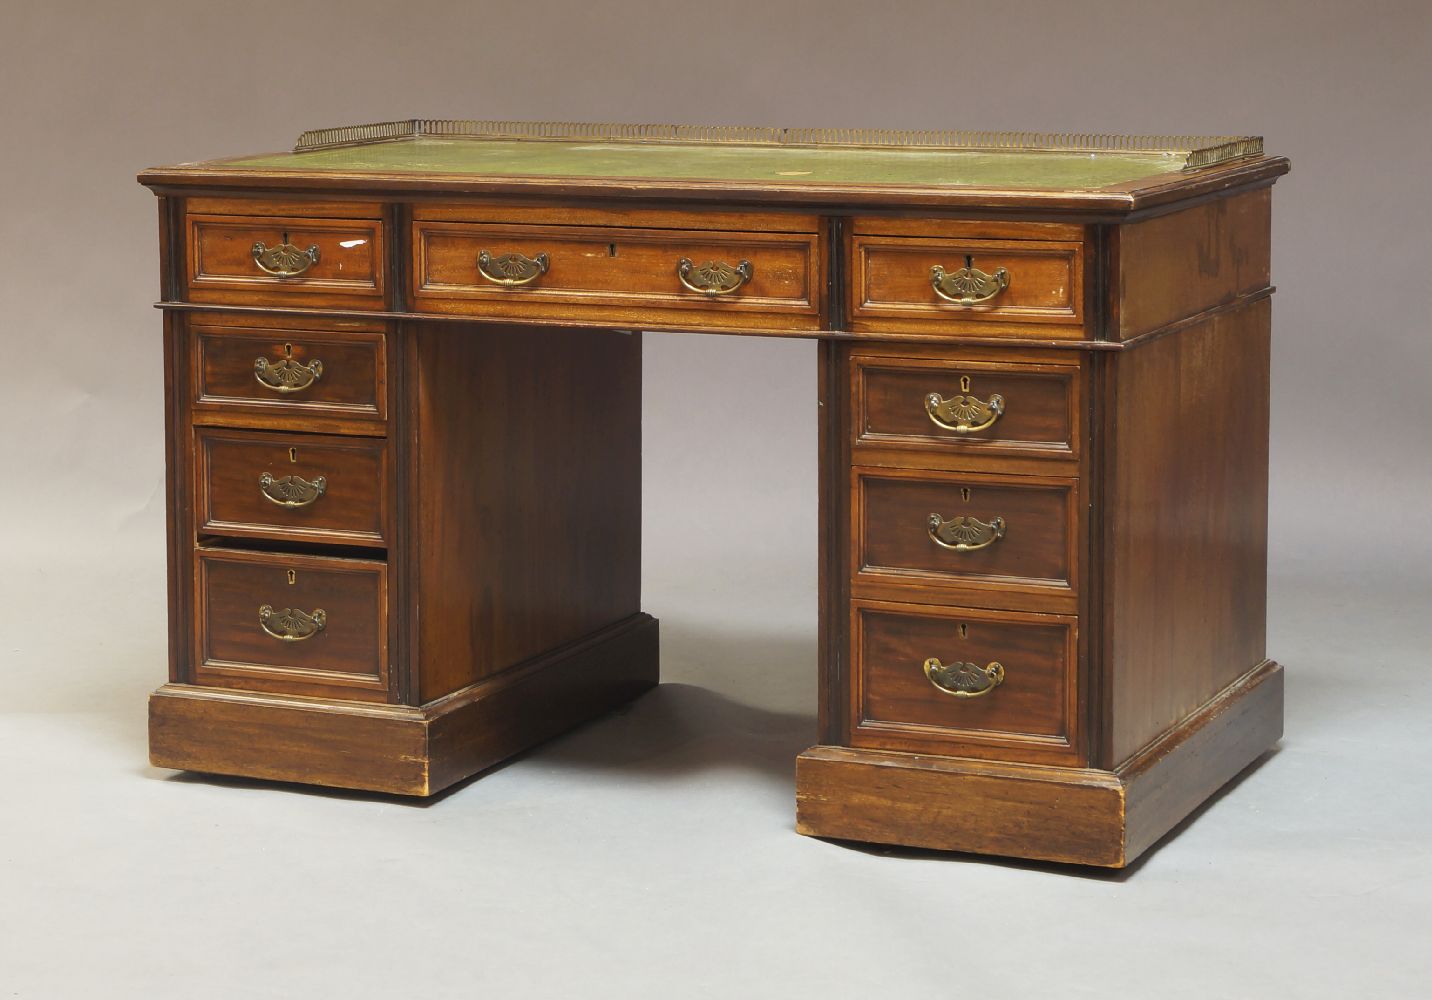 A late Victorian mahogany twin pedestal writing desk, circa 1900, the top with a brass gallery